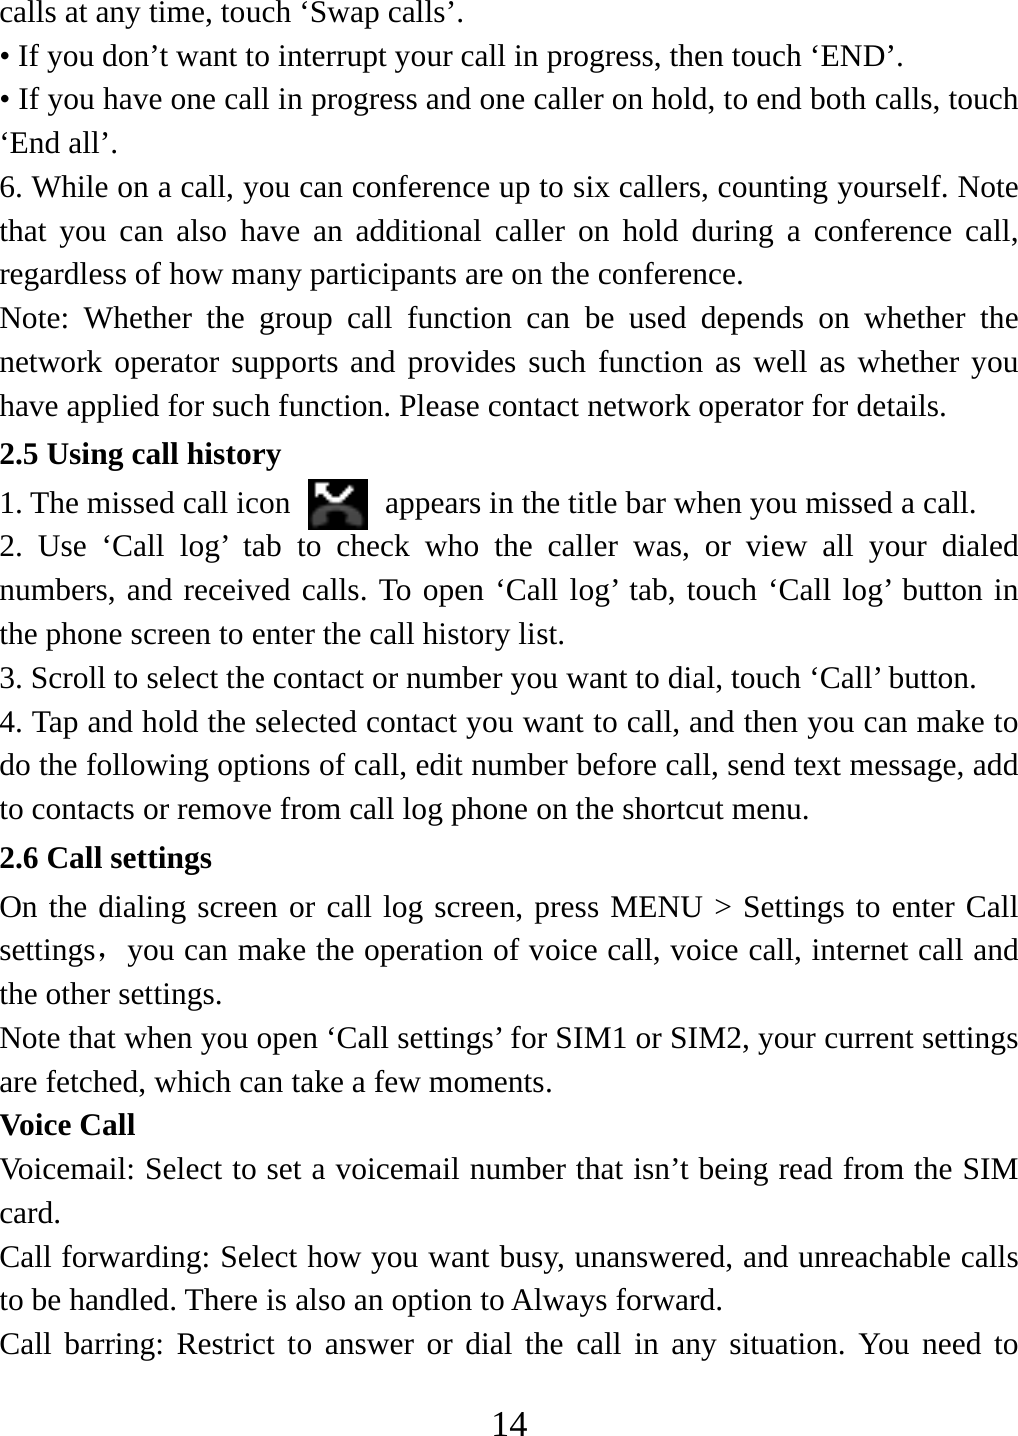   14calls at any time, touch ‘Swap calls’. • If you don’t want to interrupt your call in progress, then touch ‘END’.   • If you have one call in progress and one caller on hold, to end both calls, touch ‘End all’. 6. While on a call, you can conference up to six callers, counting yourself. Note that you can also have an additional caller on hold during a conference call, regardless of how many participants are on the conference.   Note: Whether the group call function can be used depends on whether the network operator supports and provides such function as well as whether you have applied for such function. Please contact network operator for details. 2.5 Using call history 1. The missed call icon   appears in the title bar when you missed a call.   2. Use ‘Call log’ tab to check who the caller was, or view all your dialed numbers, and received calls. To open ‘Call log’ tab, touch ‘Call log’ button in the phone screen to enter the call history list. 3. Scroll to select the contact or number you want to dial, touch ‘Call’ button. 4. Tap and hold the selected contact you want to call, and then you can make to do the following options of call, edit number before call, send text message, add to contacts or remove from call log phone on the shortcut menu. 2.6 Call settings On the dialing screen or call log screen, press MENU &gt; Settings to enter Call settings，you can make the operation of voice call, voice call, internet call and the other settings.   Note that when you open ‘Call settings’ for SIM1 or SIM2, your current settings are fetched, which can take a few moments.   Voice Call Voicemail: Select to set a voicemail number that isn’t being read from the SIM card.  Call forwarding: Select how you want busy, unanswered, and unreachable calls to be handled. There is also an option to Always forward.   Call barring: Restrict to answer or dial the call in any situation. You need to 